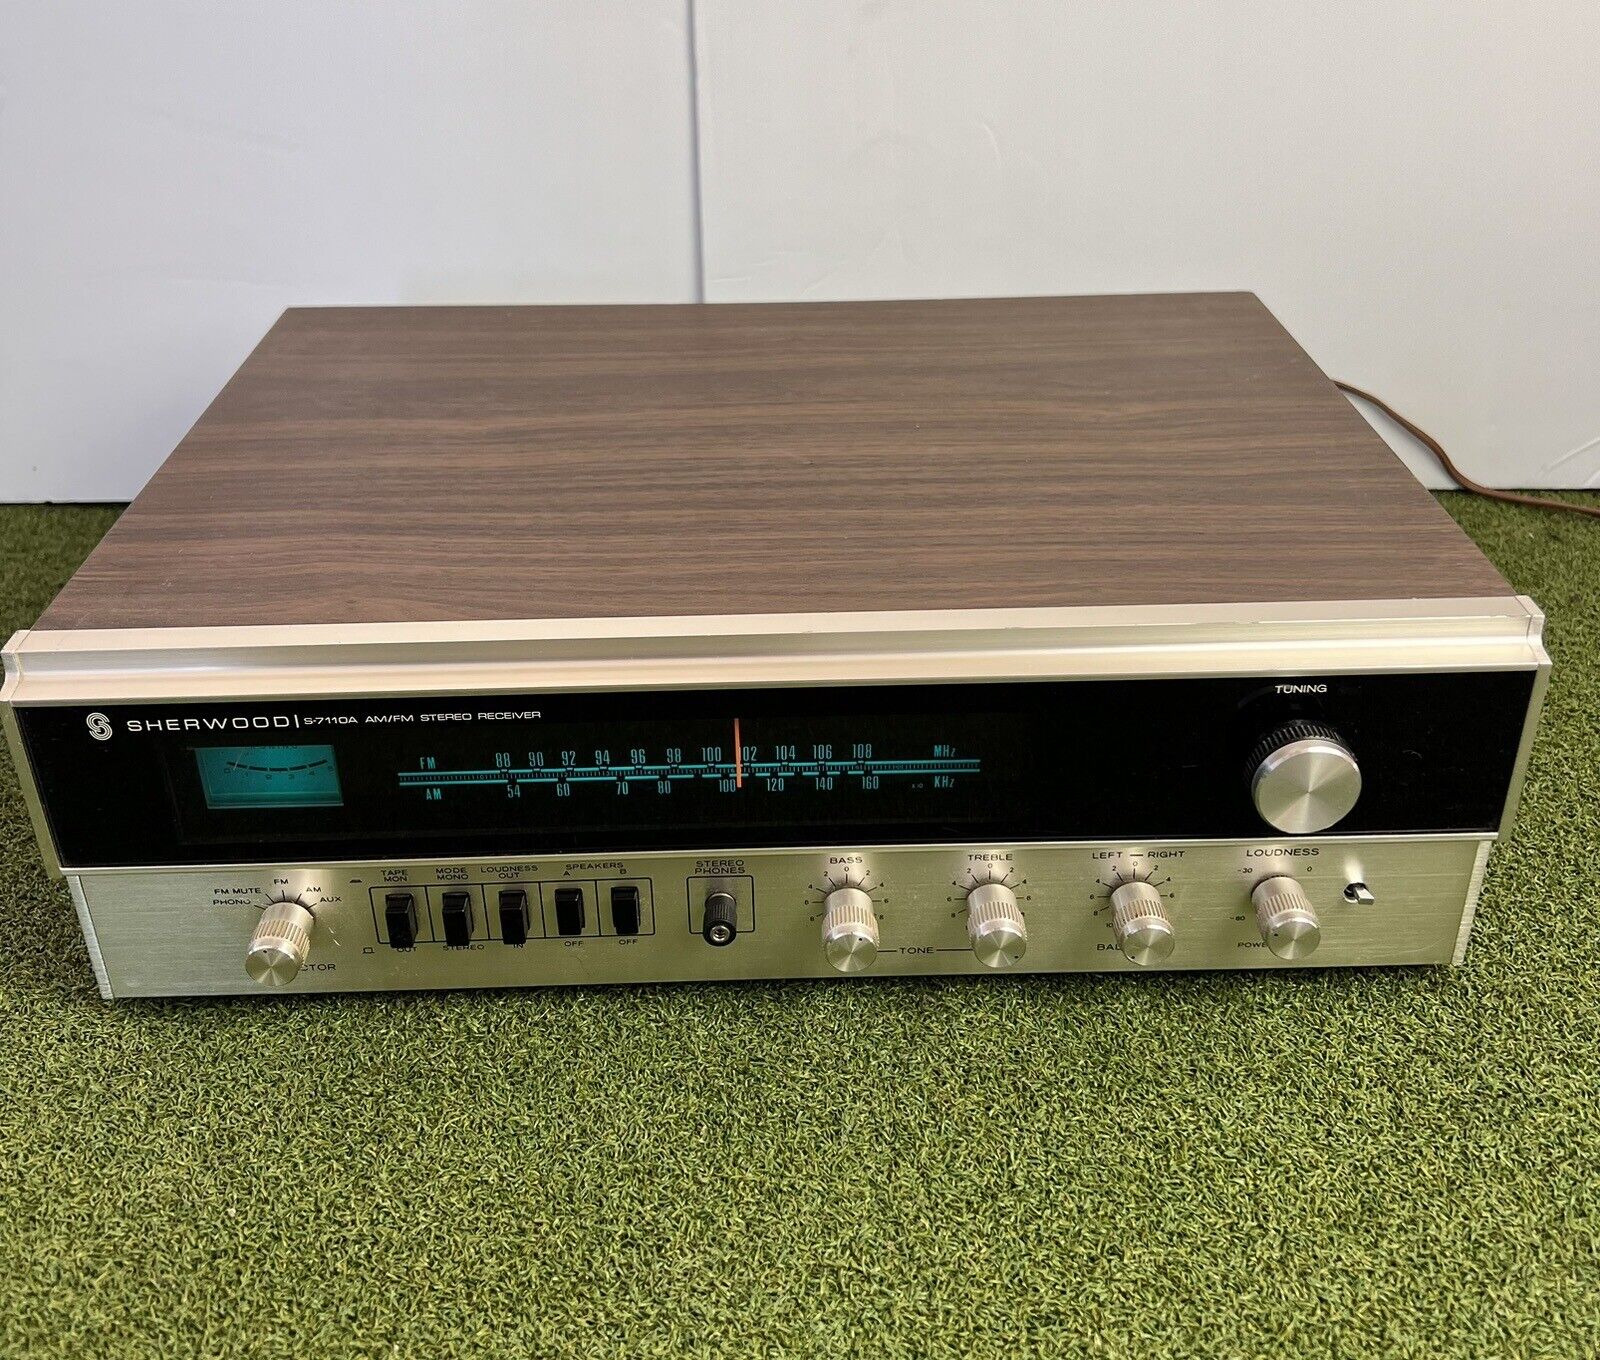 Vintage SHERWOOD S-7110A  STEREO RECEIVER  - Works